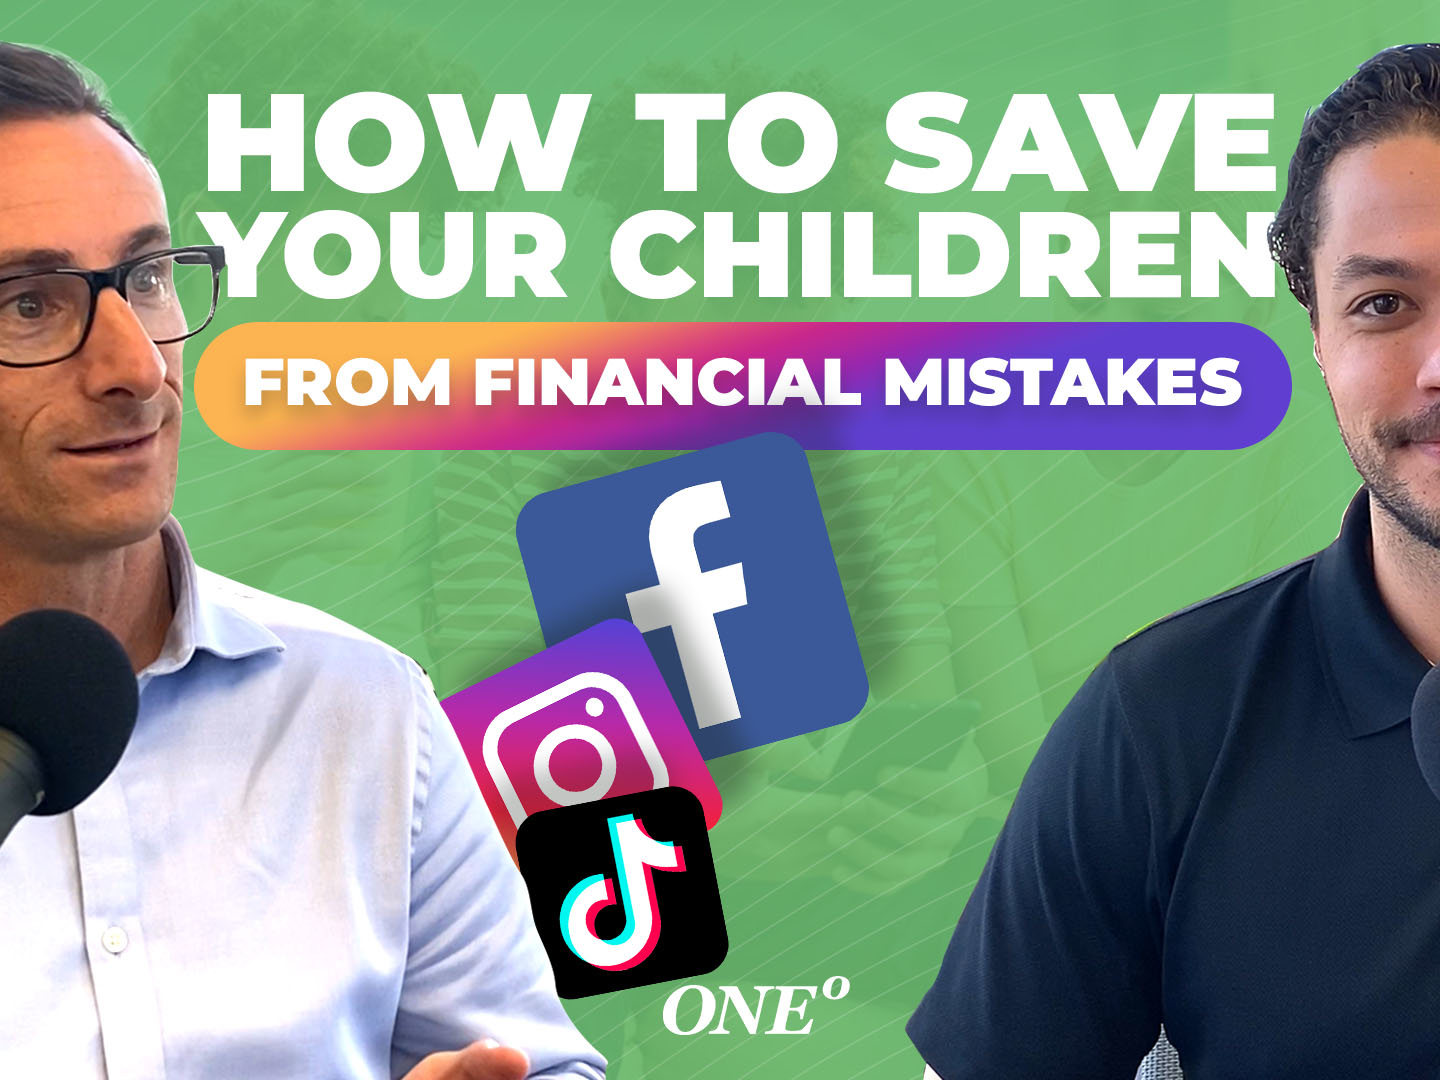 Child financial mistakes